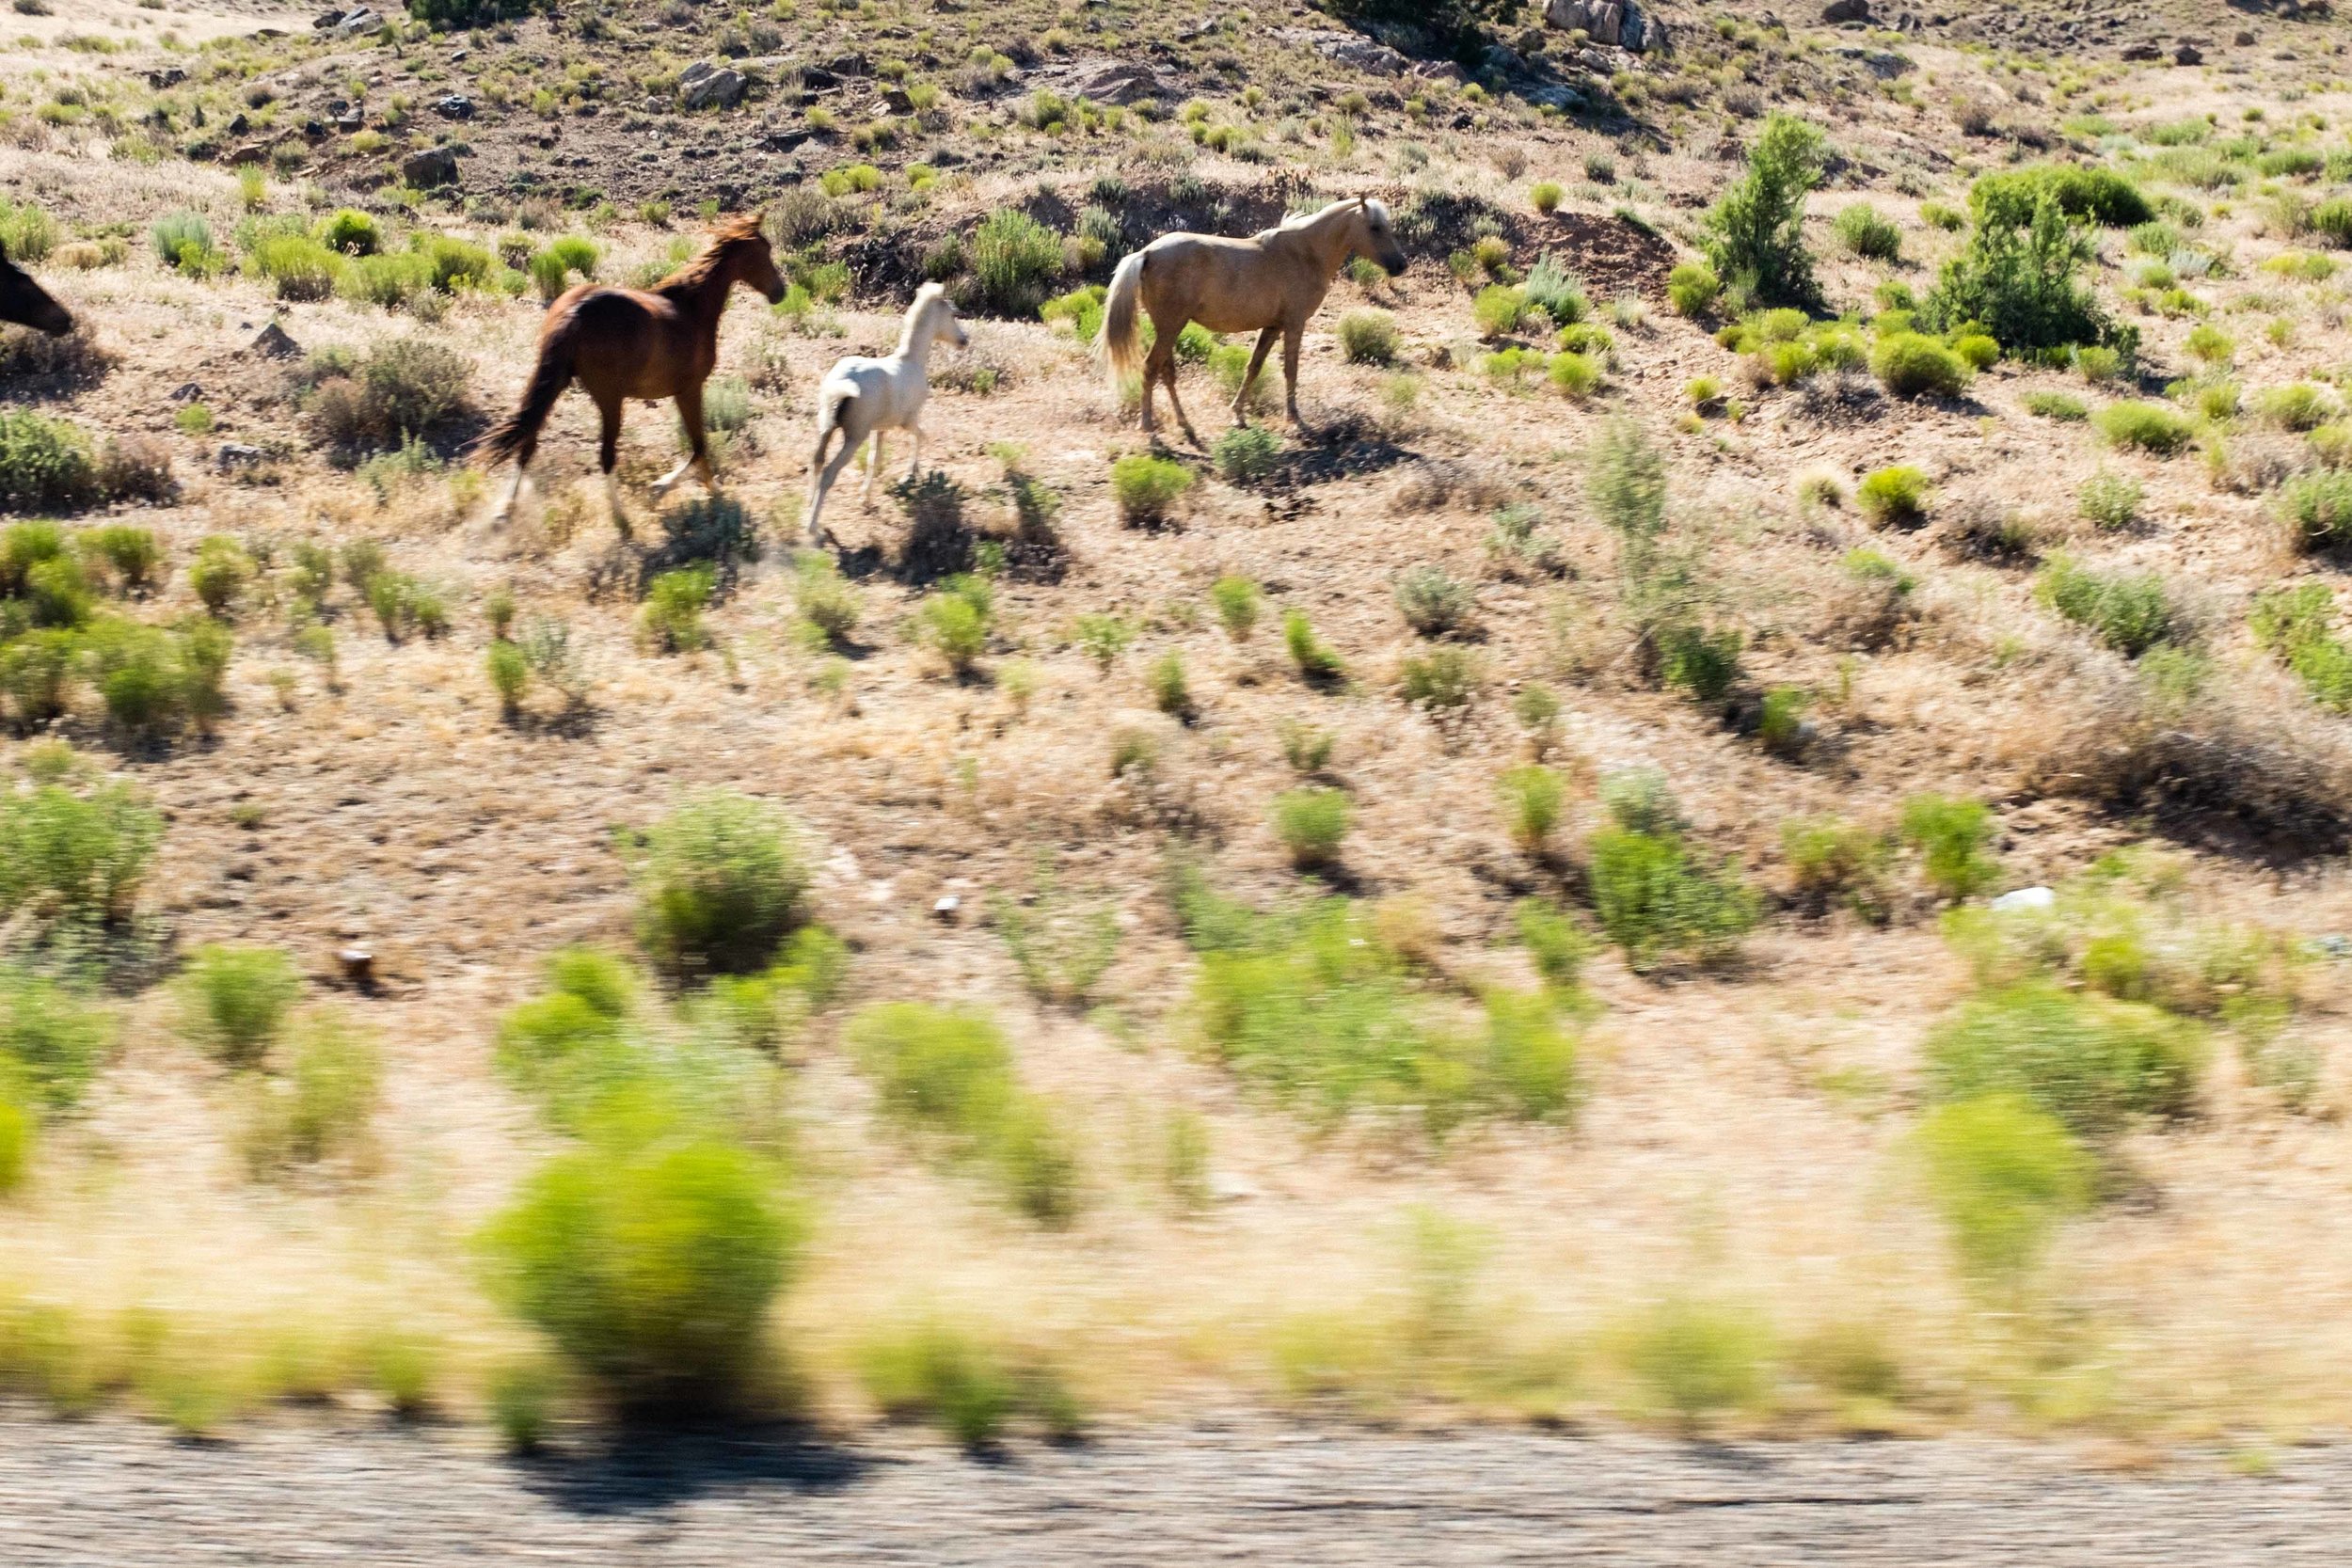 Horses. Being swift and beautiful in the desert.